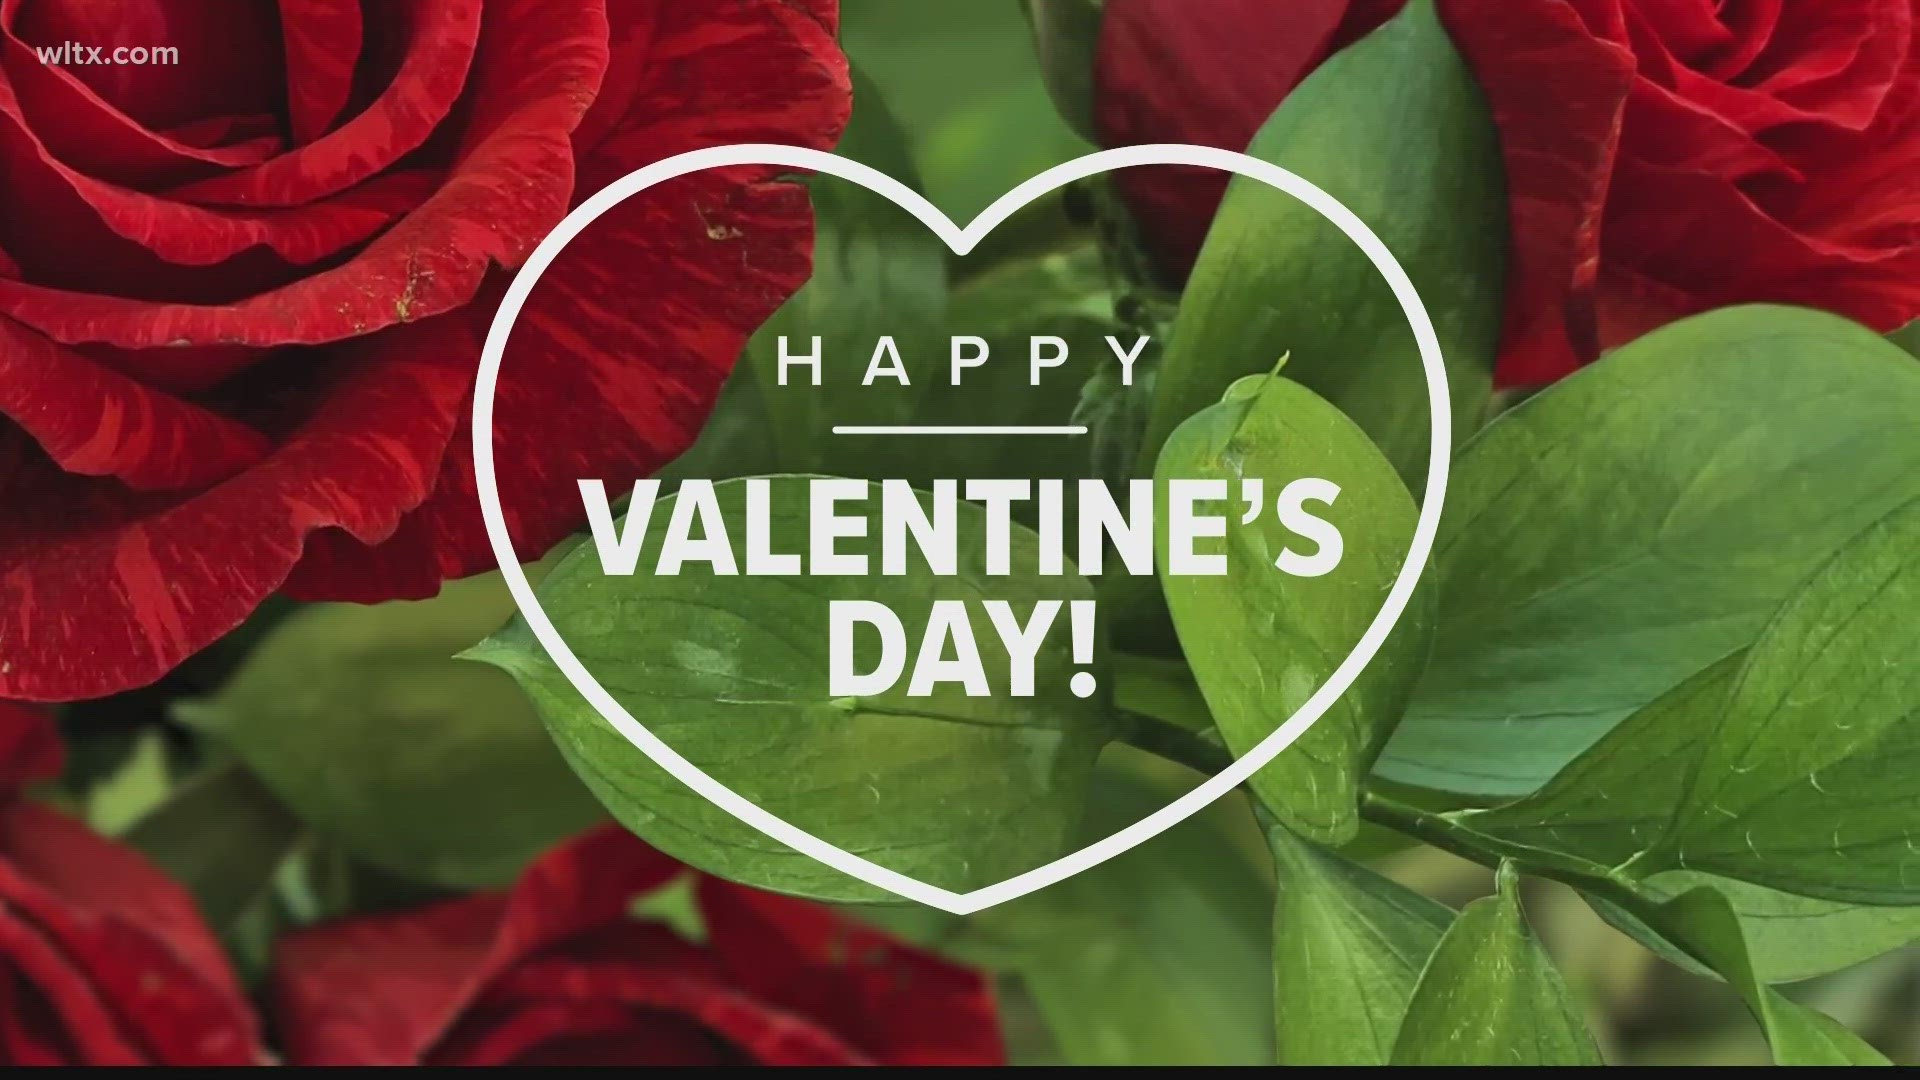 It's one of the busiest times of the year for flower shops as Valentines is Wednesday.